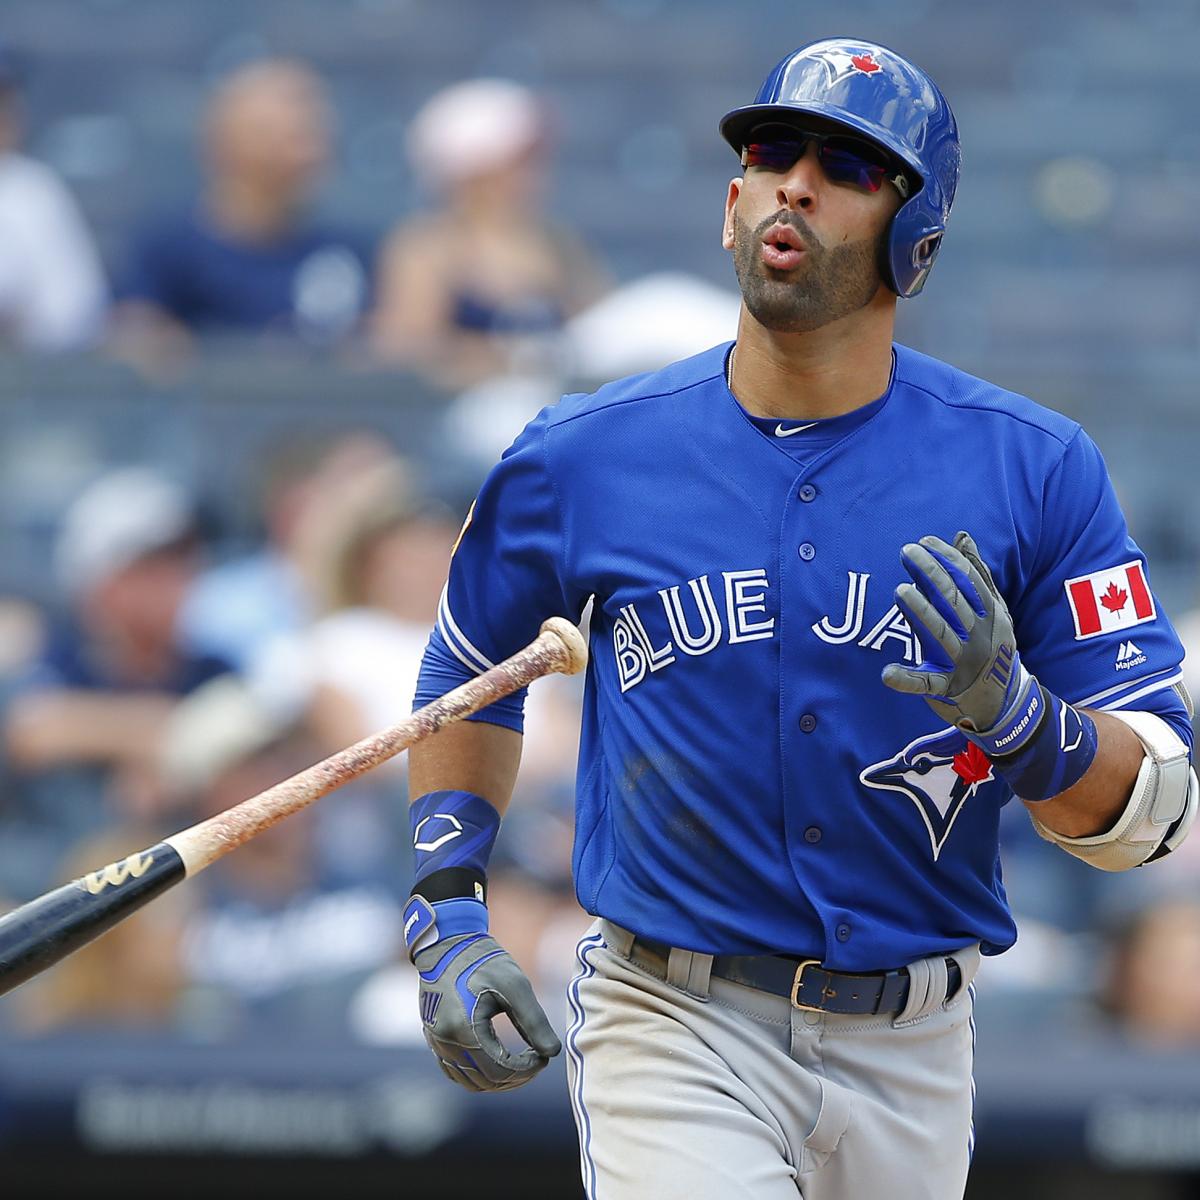 Jose Bautista, Braves Agree on Minor League Contract, Will Play 3B